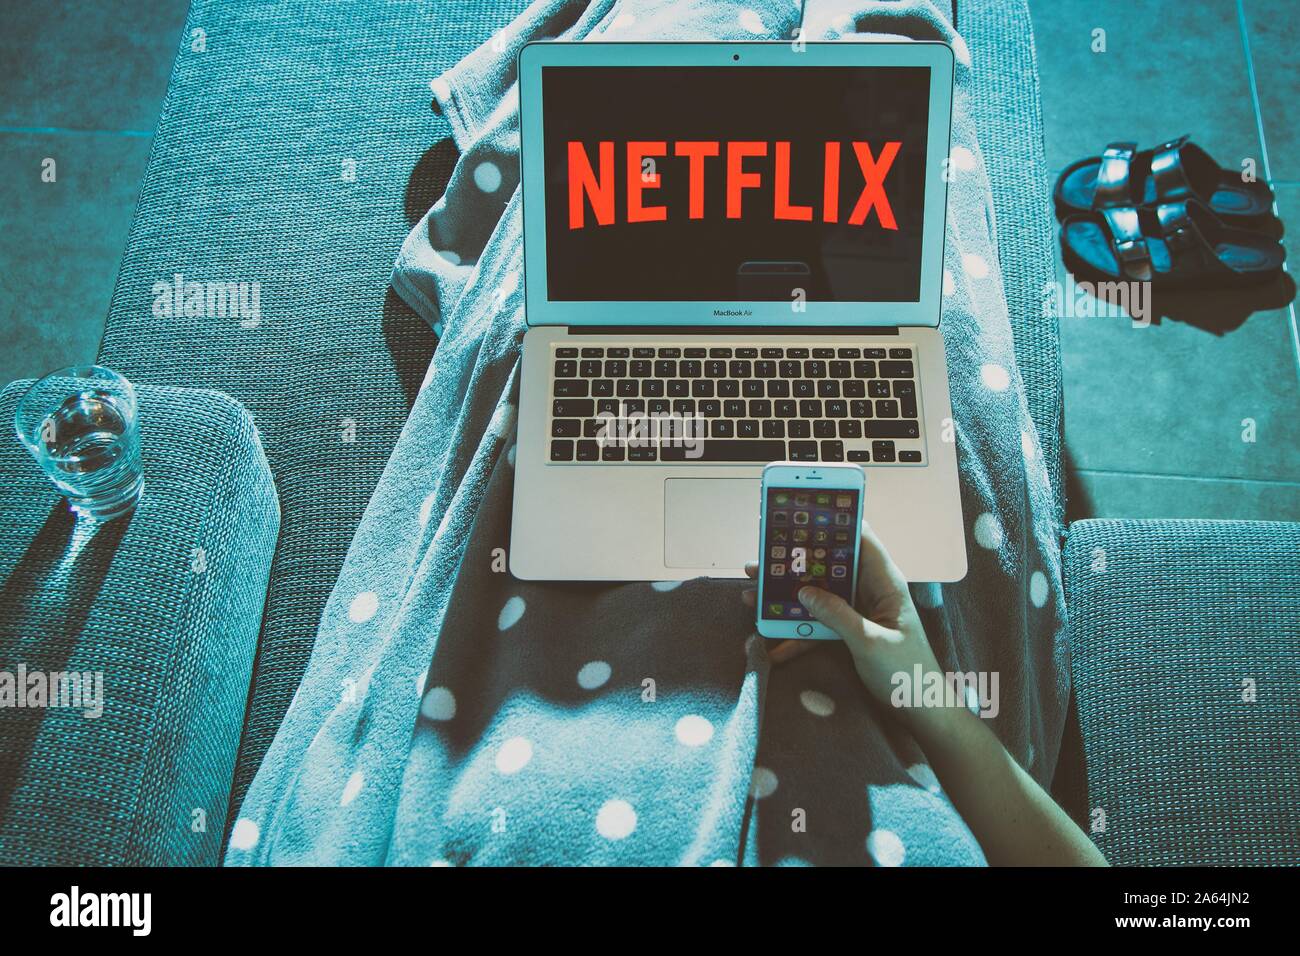 Digital composing, hand with smartphone on a couch with Netflix logo on a laptop screen, Belgium Stock Photo